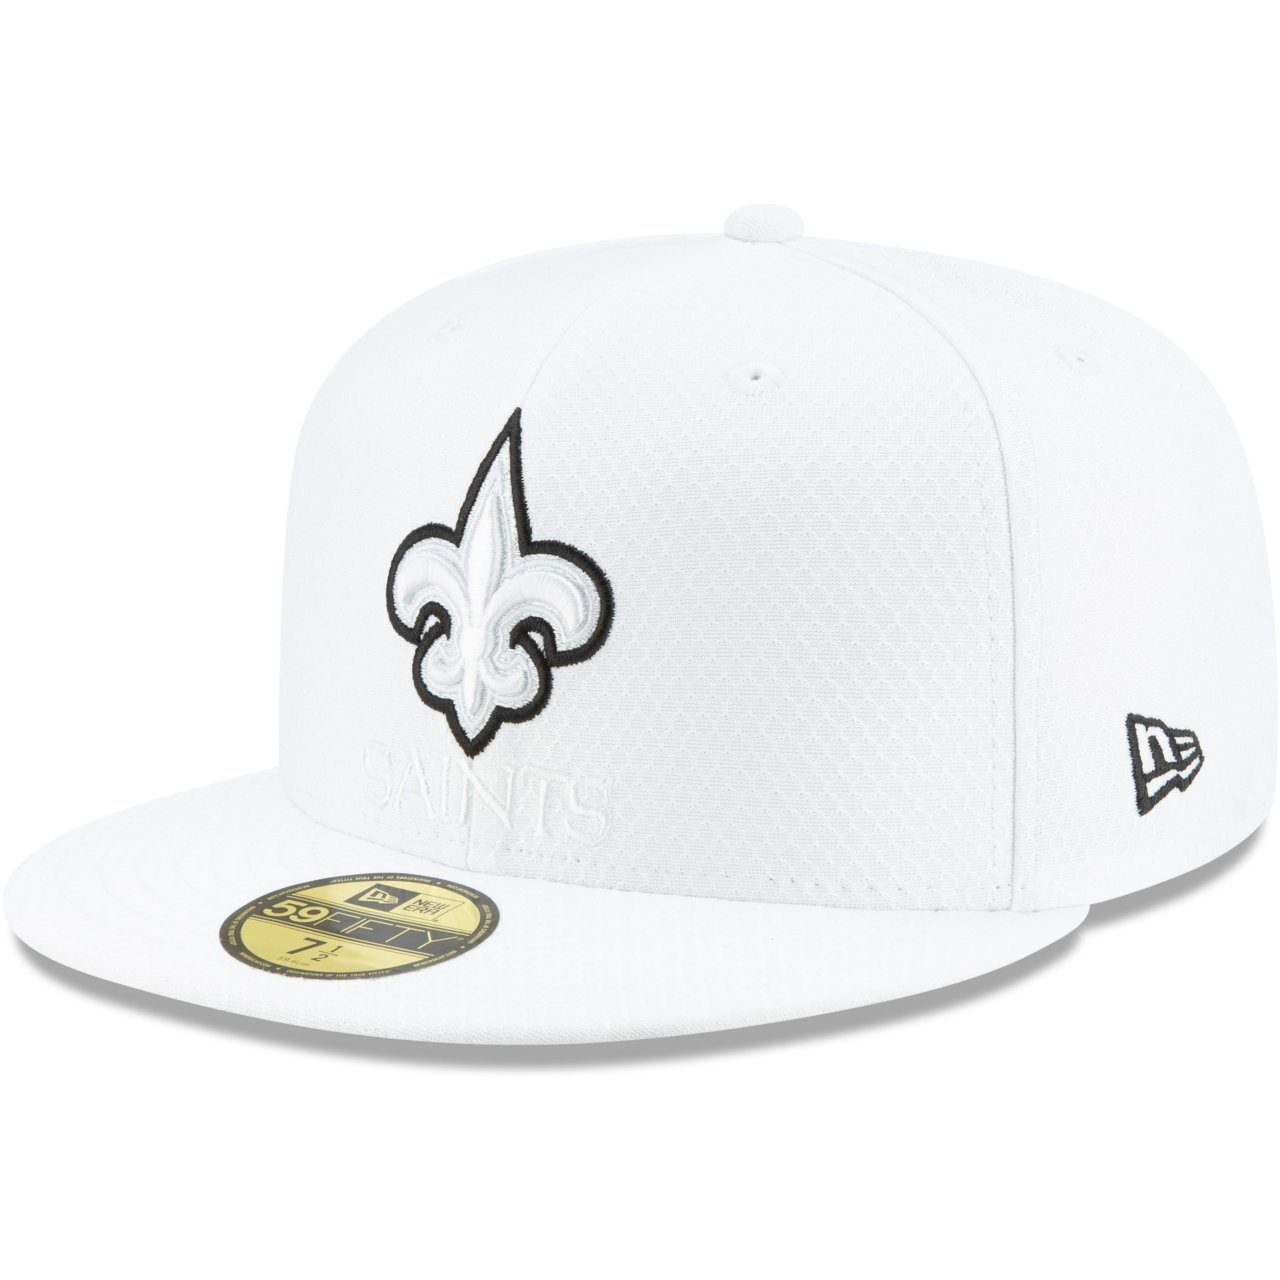 New Era Fitted Cap 59Fifty PLATINUM NFL Sideline New Orleans Saints